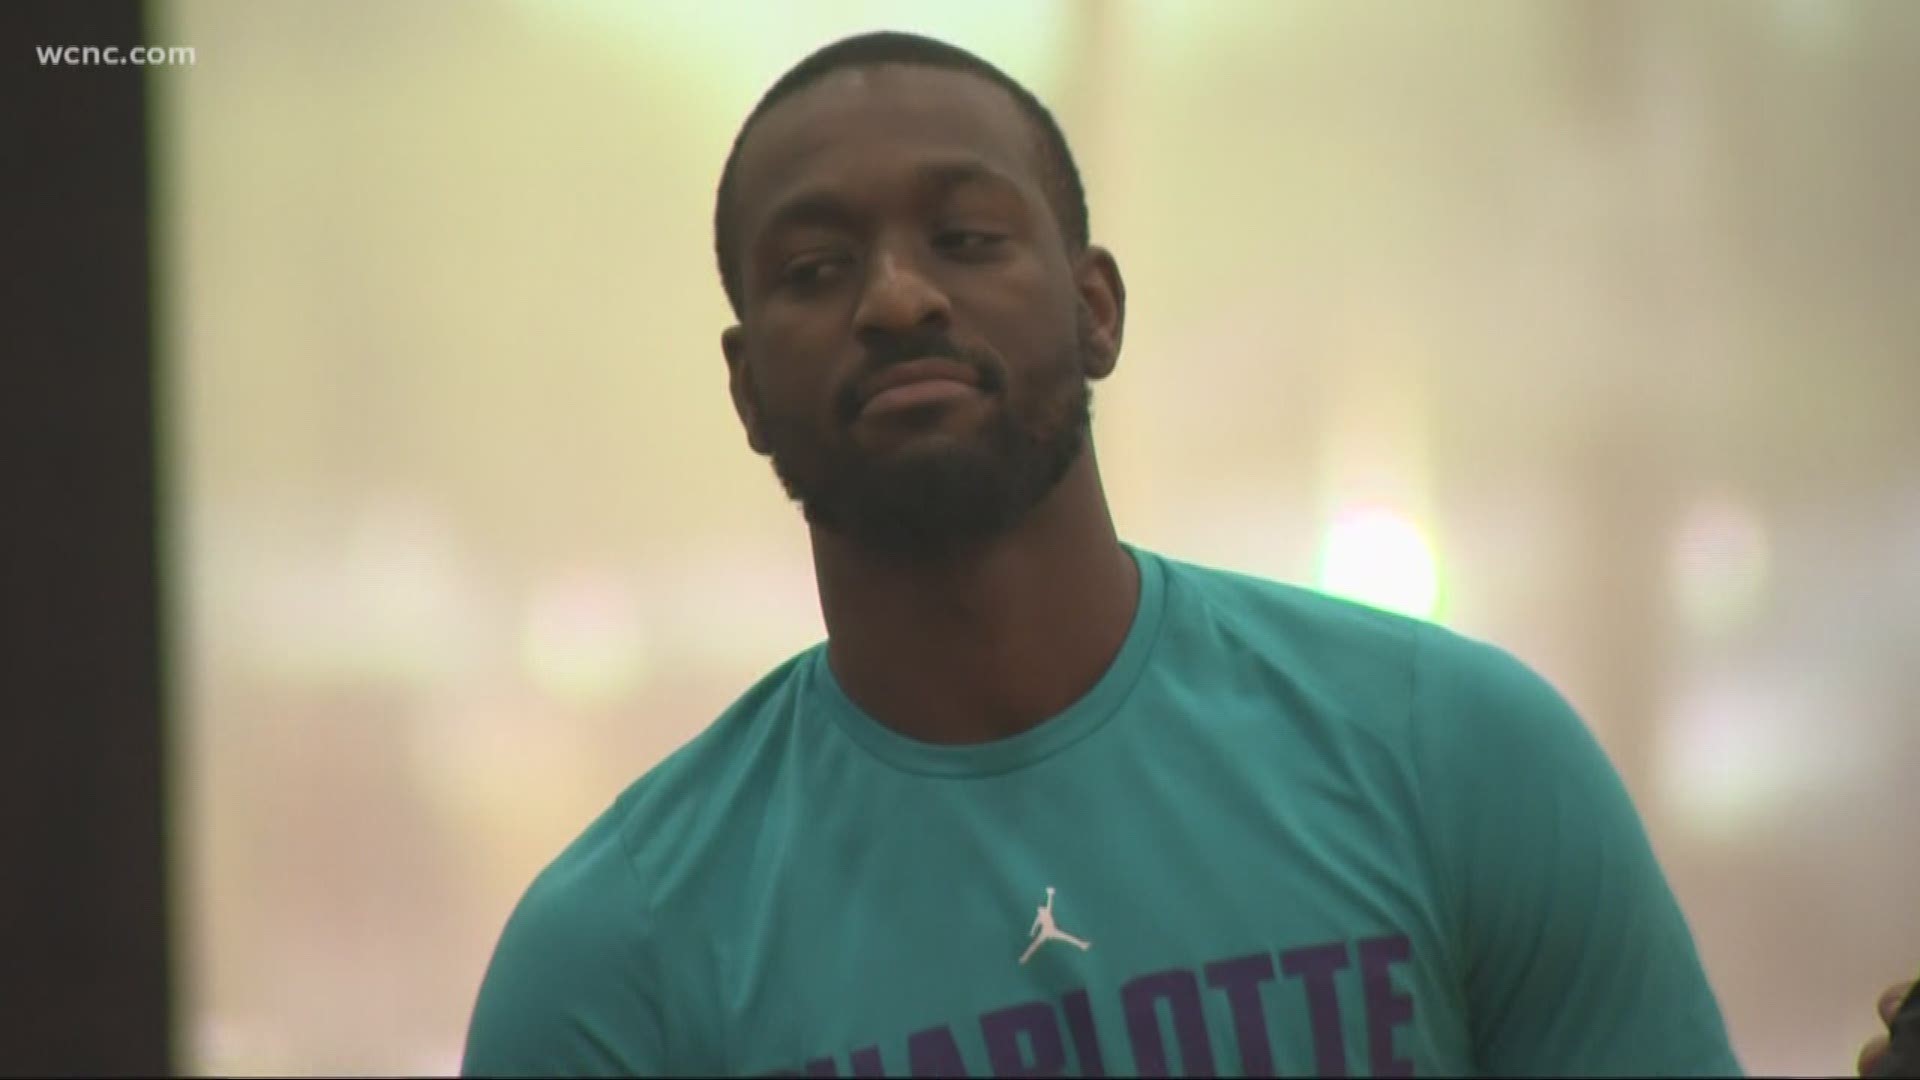 Rumors are swirling that Hornet's star Kemba Walker could be traded during tonight's NBA draft.